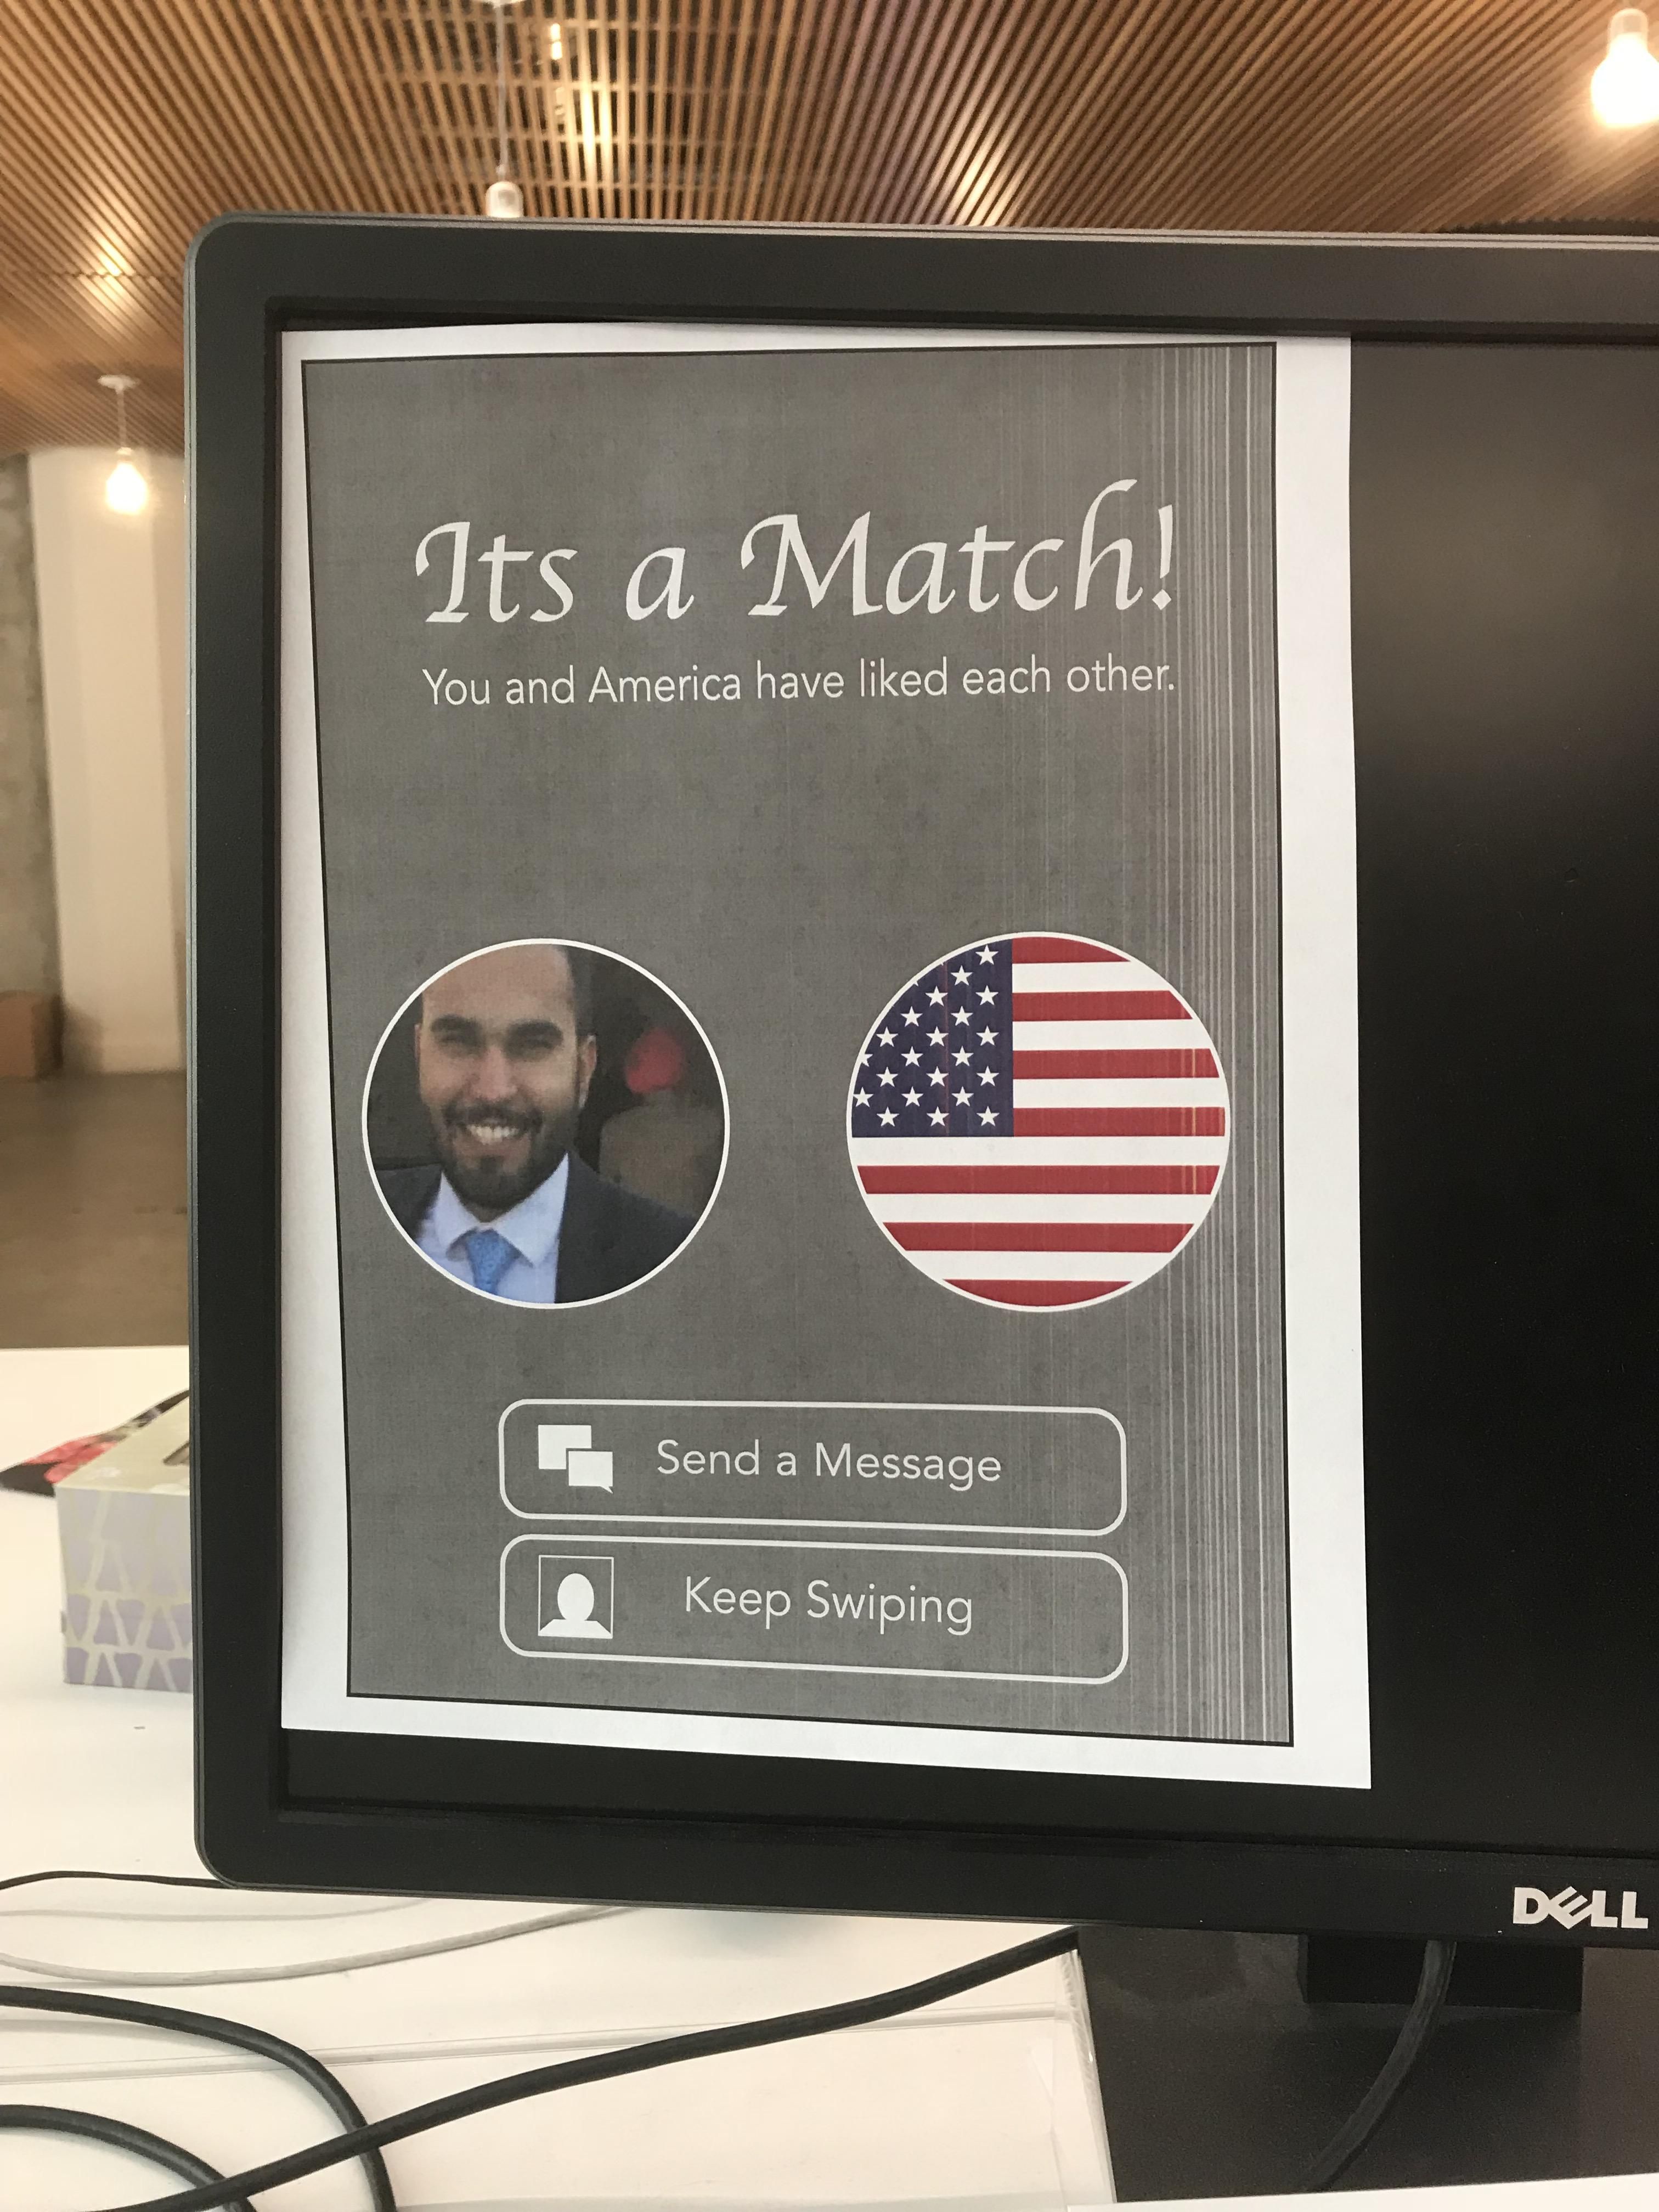 One of my coworkers is getting his citizenship today, so we left him a surprise for when he gets back.